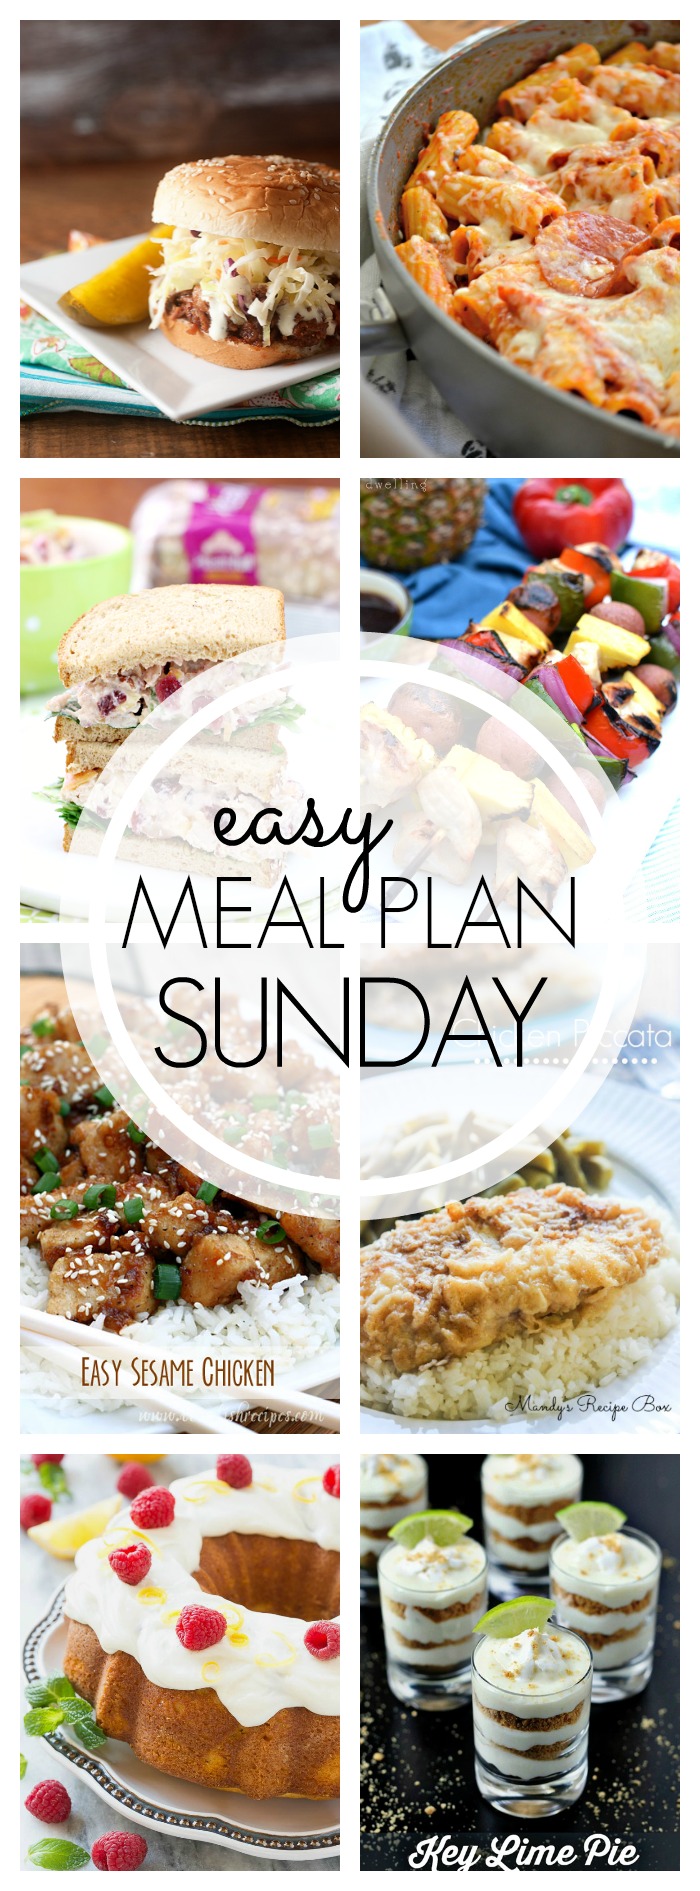 Easy Meal Plan Sunday #59